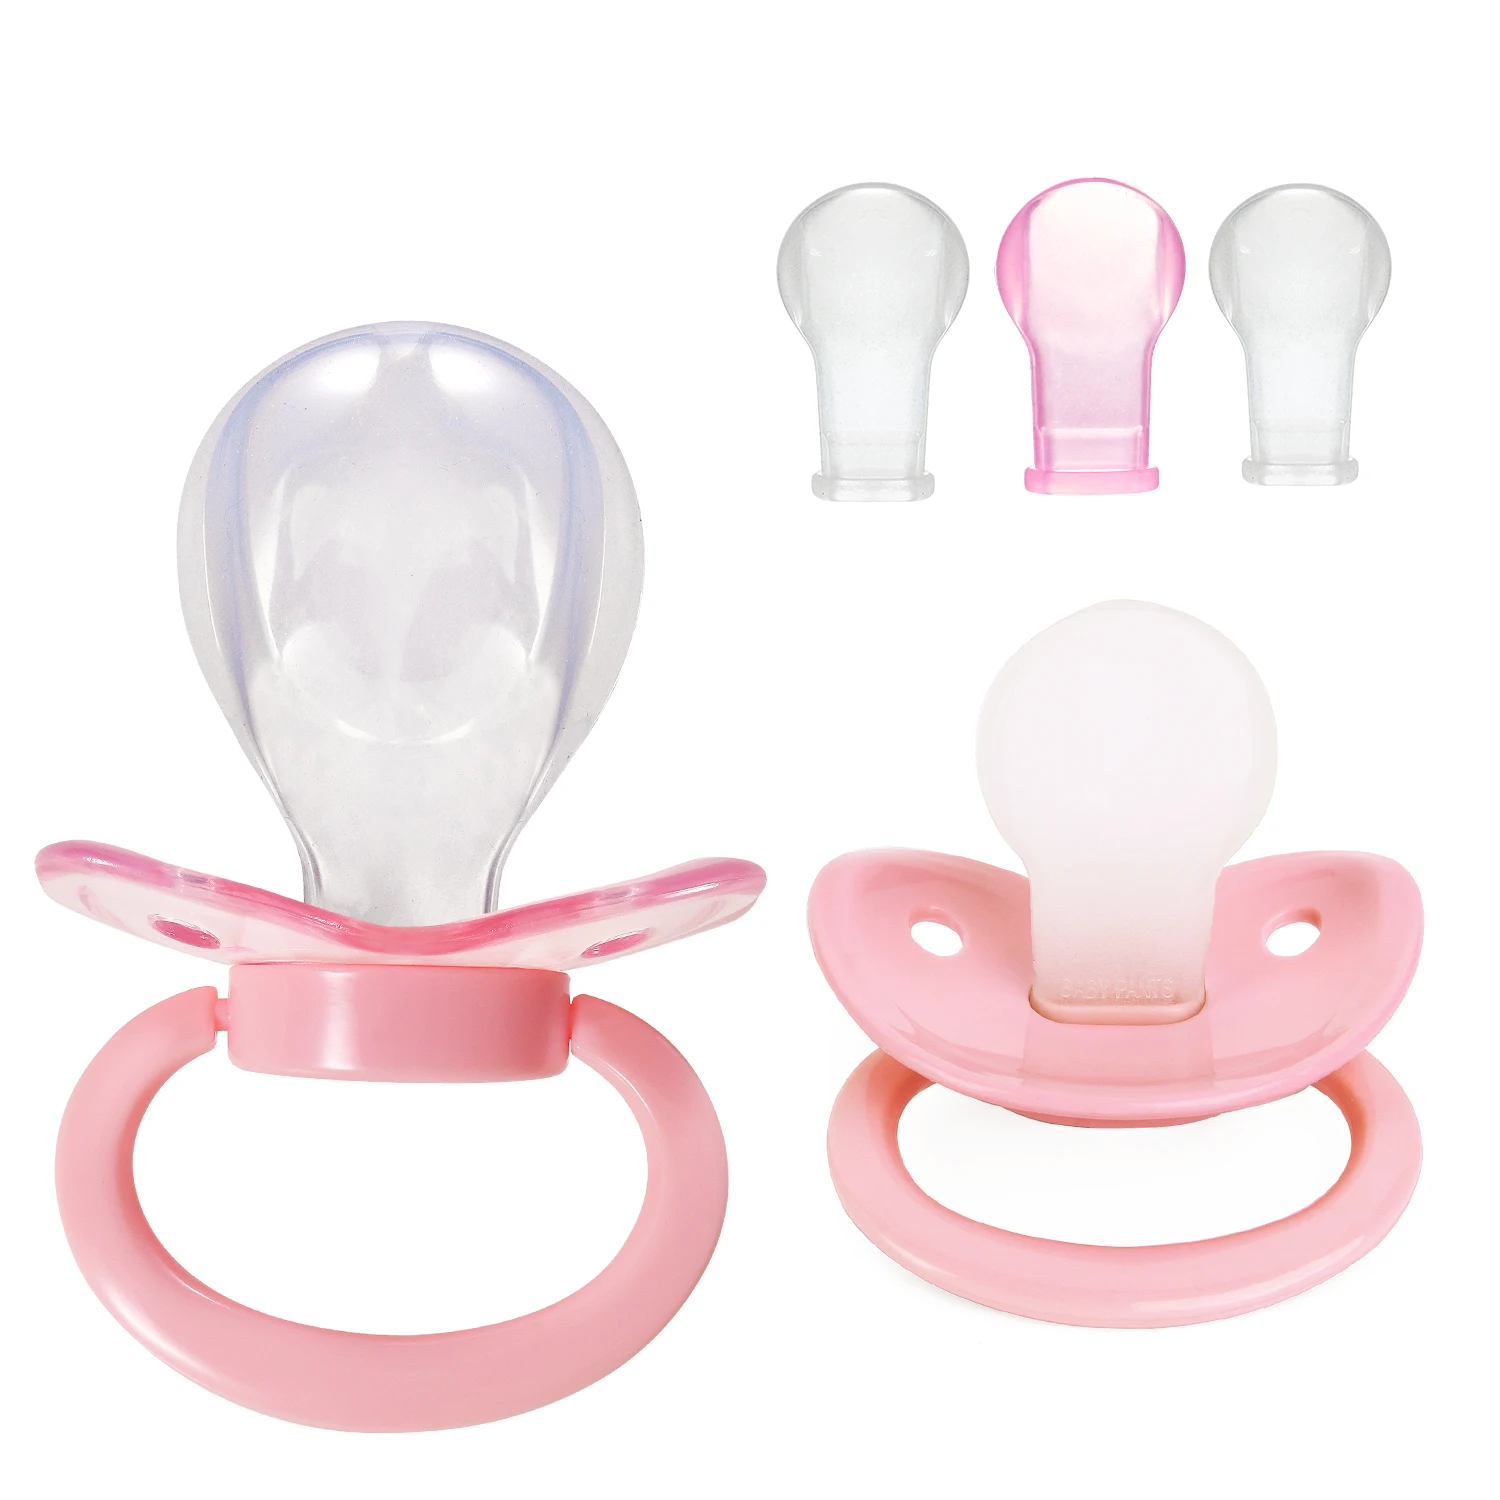 

Adult Sized Pacifier Variety 5 Pack Dummy for Adult BabiesLarge Shield (Pink)